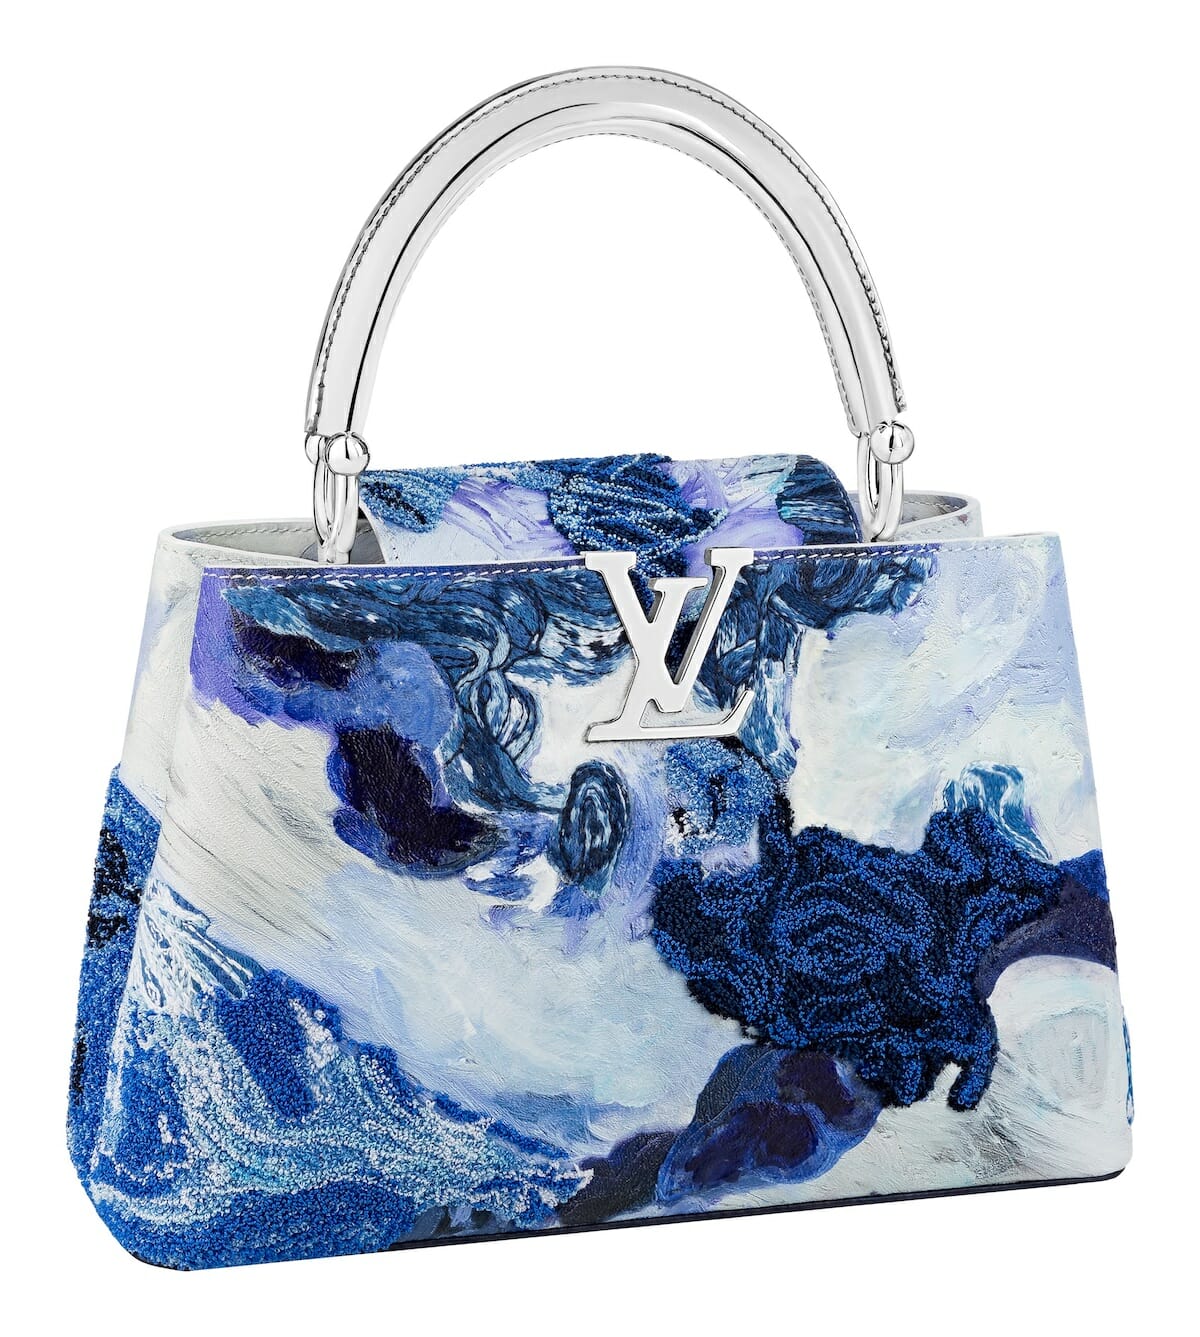 Louis Vuitton & The Six Artists Who Contributed to the